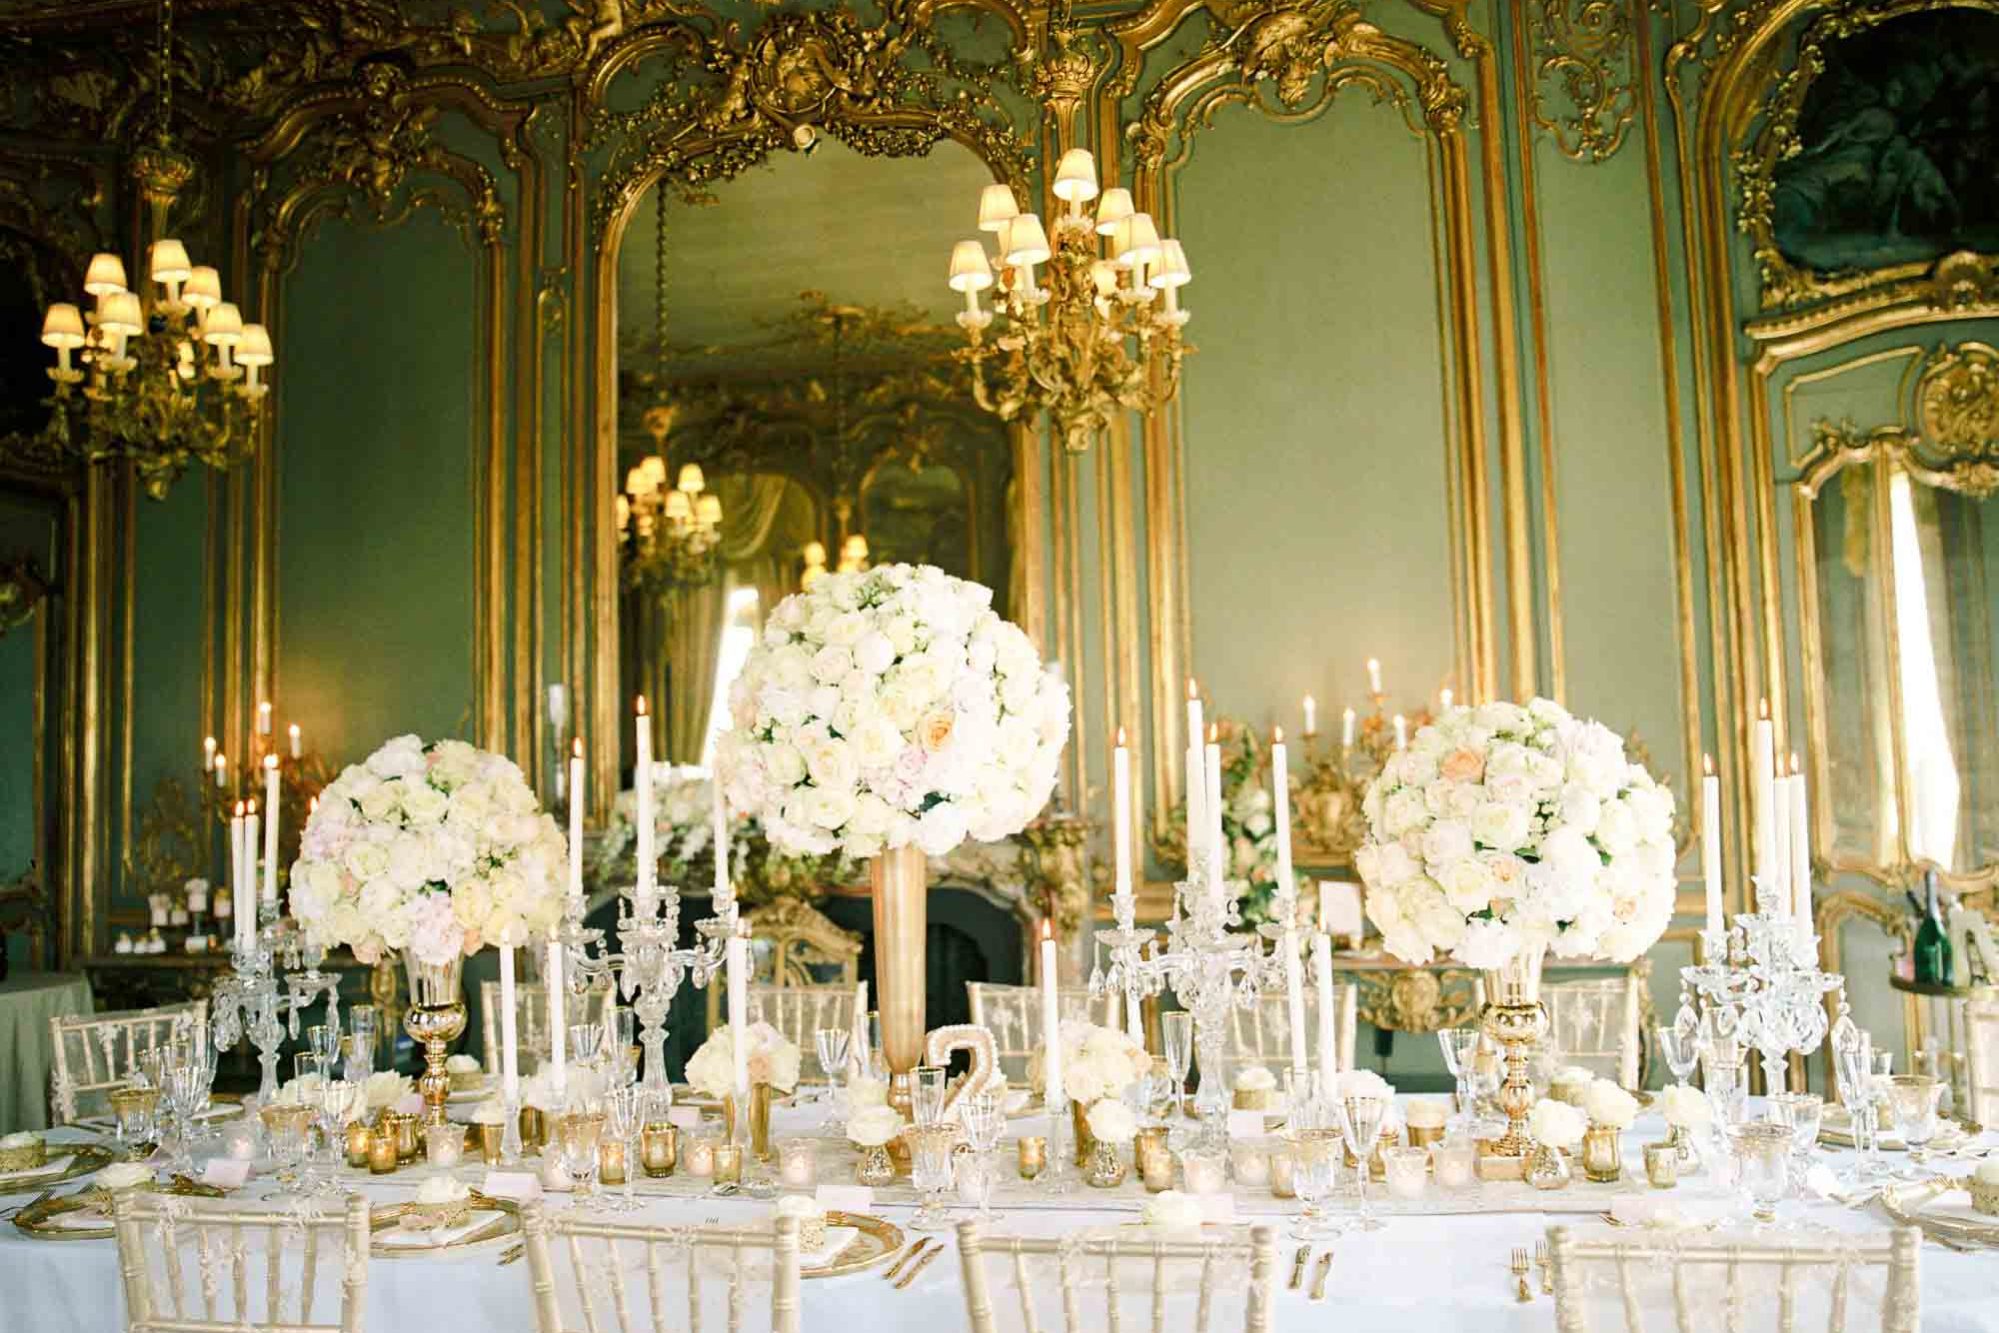 Cliveden House | To find out more about this wedding look and the inspiration behind it take a look on our website where you can also find plenty of other luxurious floral designs.